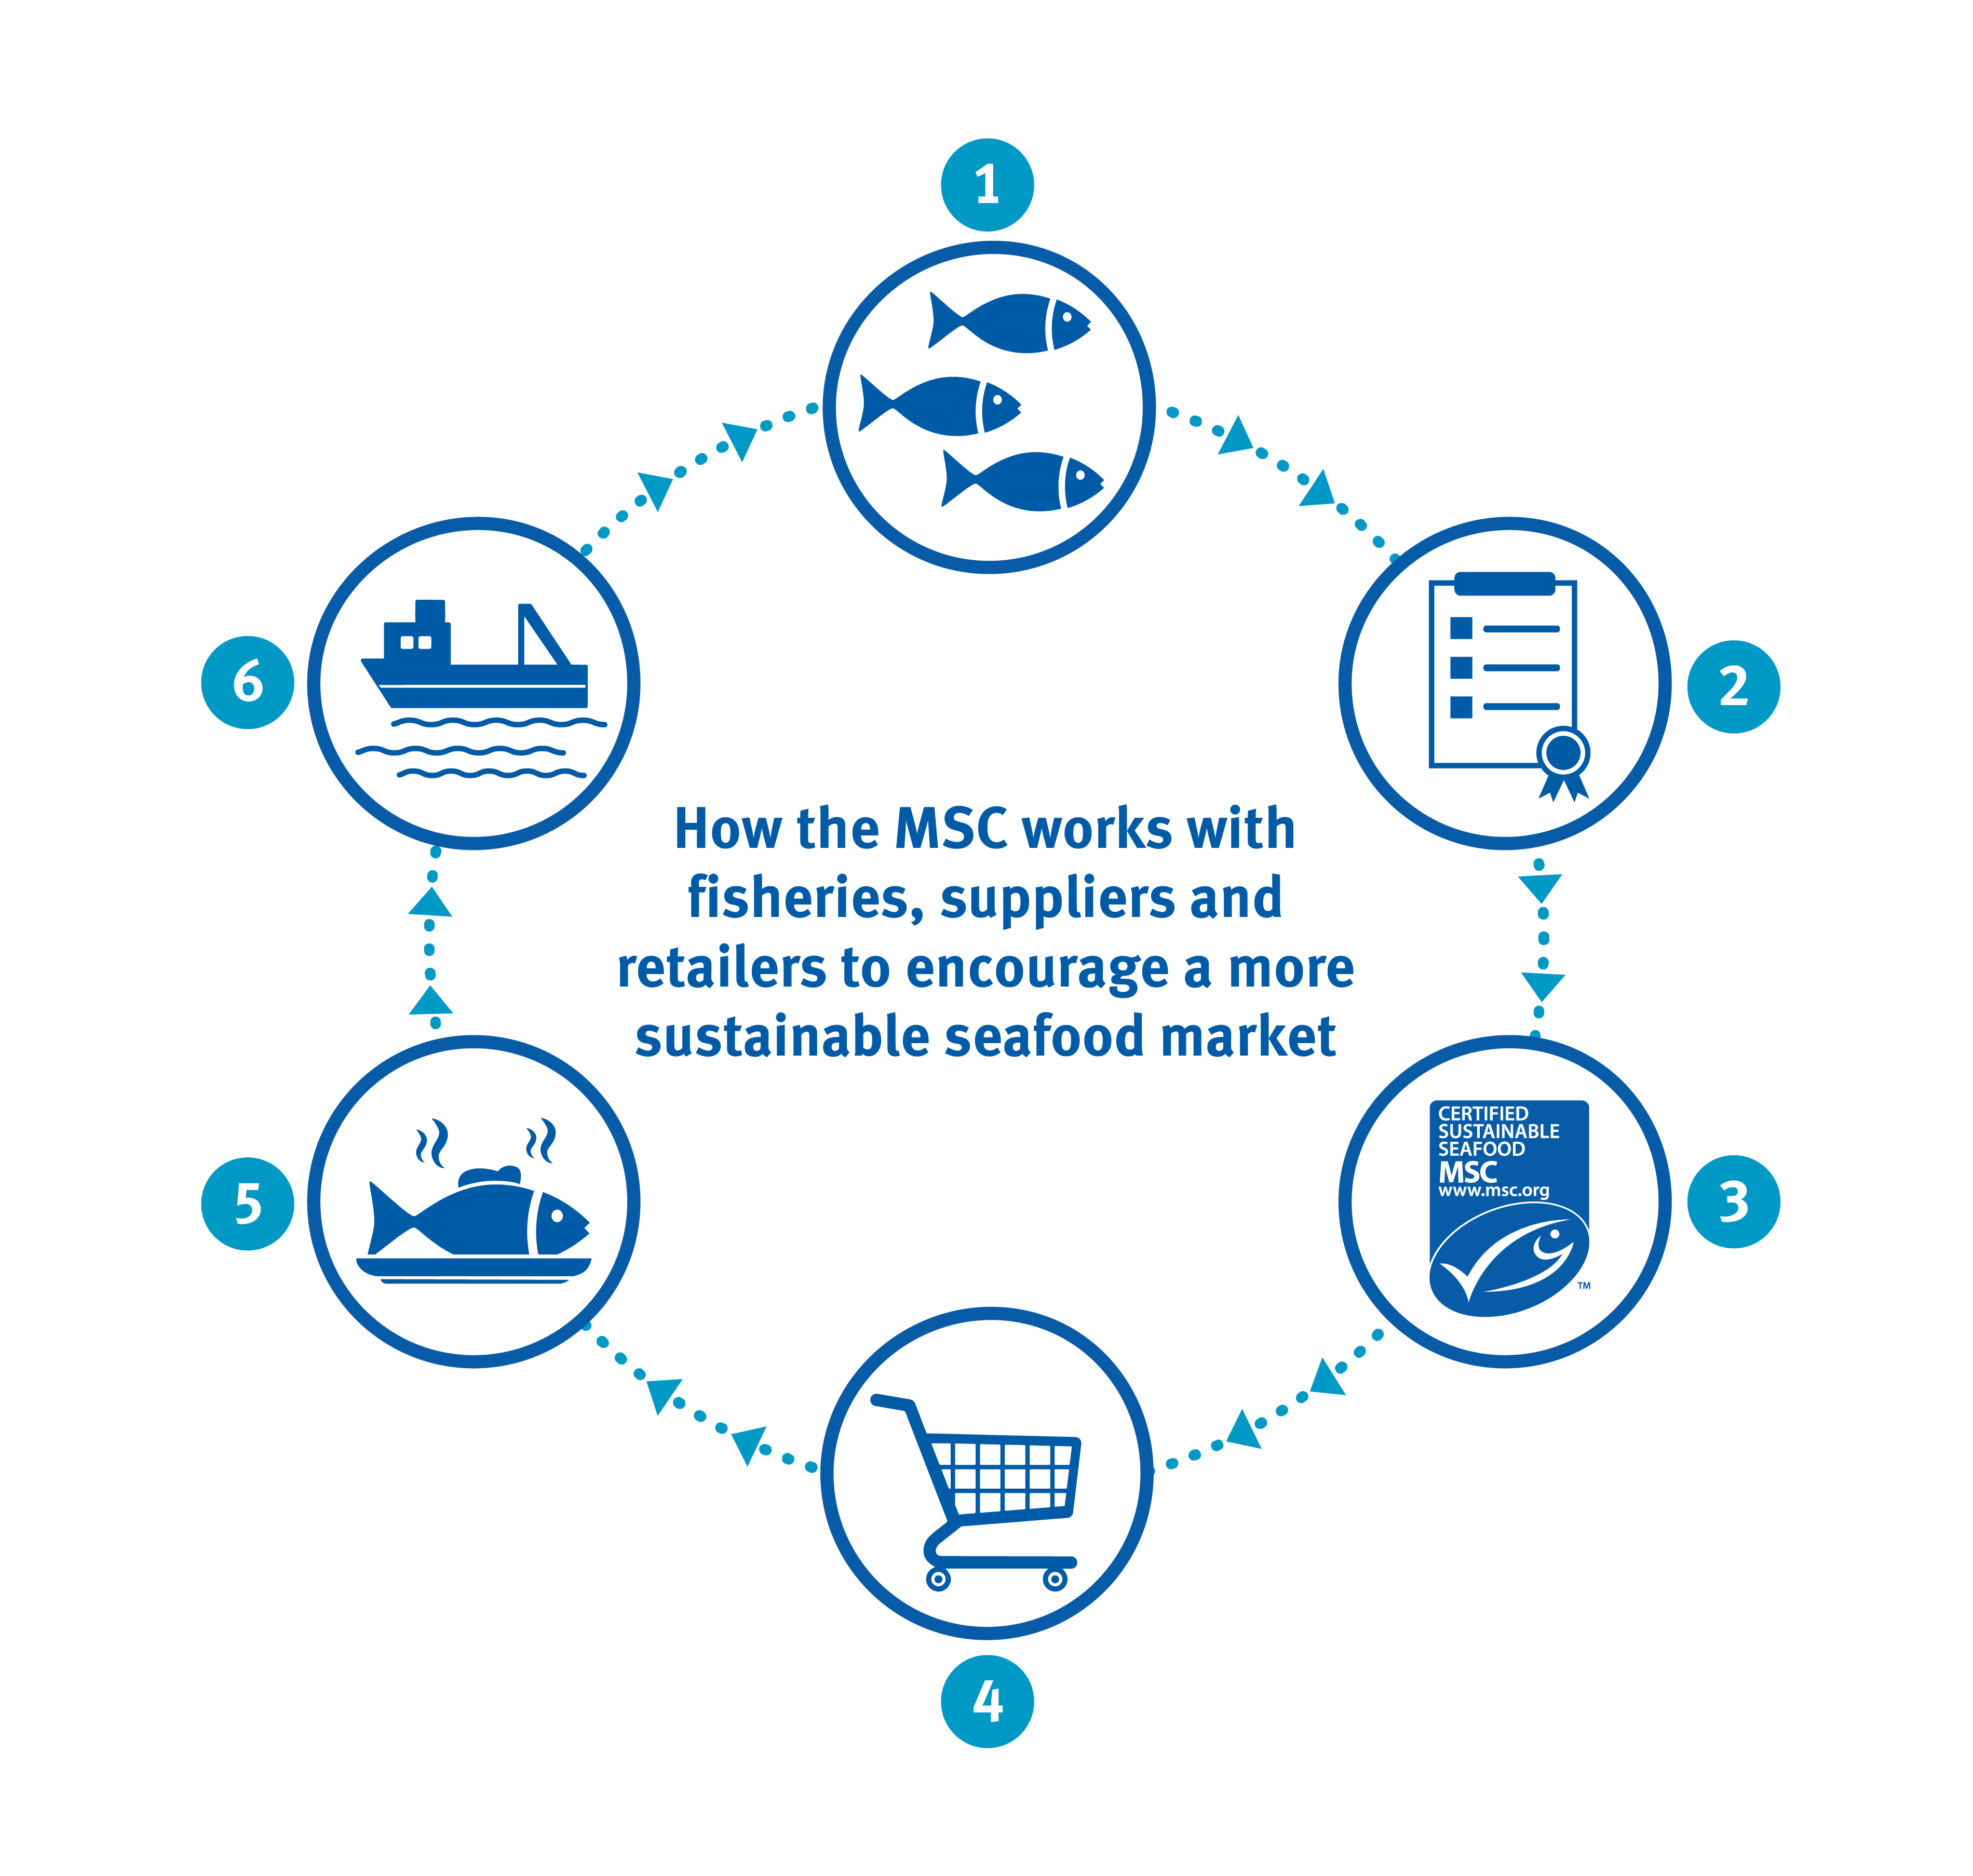 How the MSC works with fisheries, suppliers and retailers to encourage a more sustainable seafood market